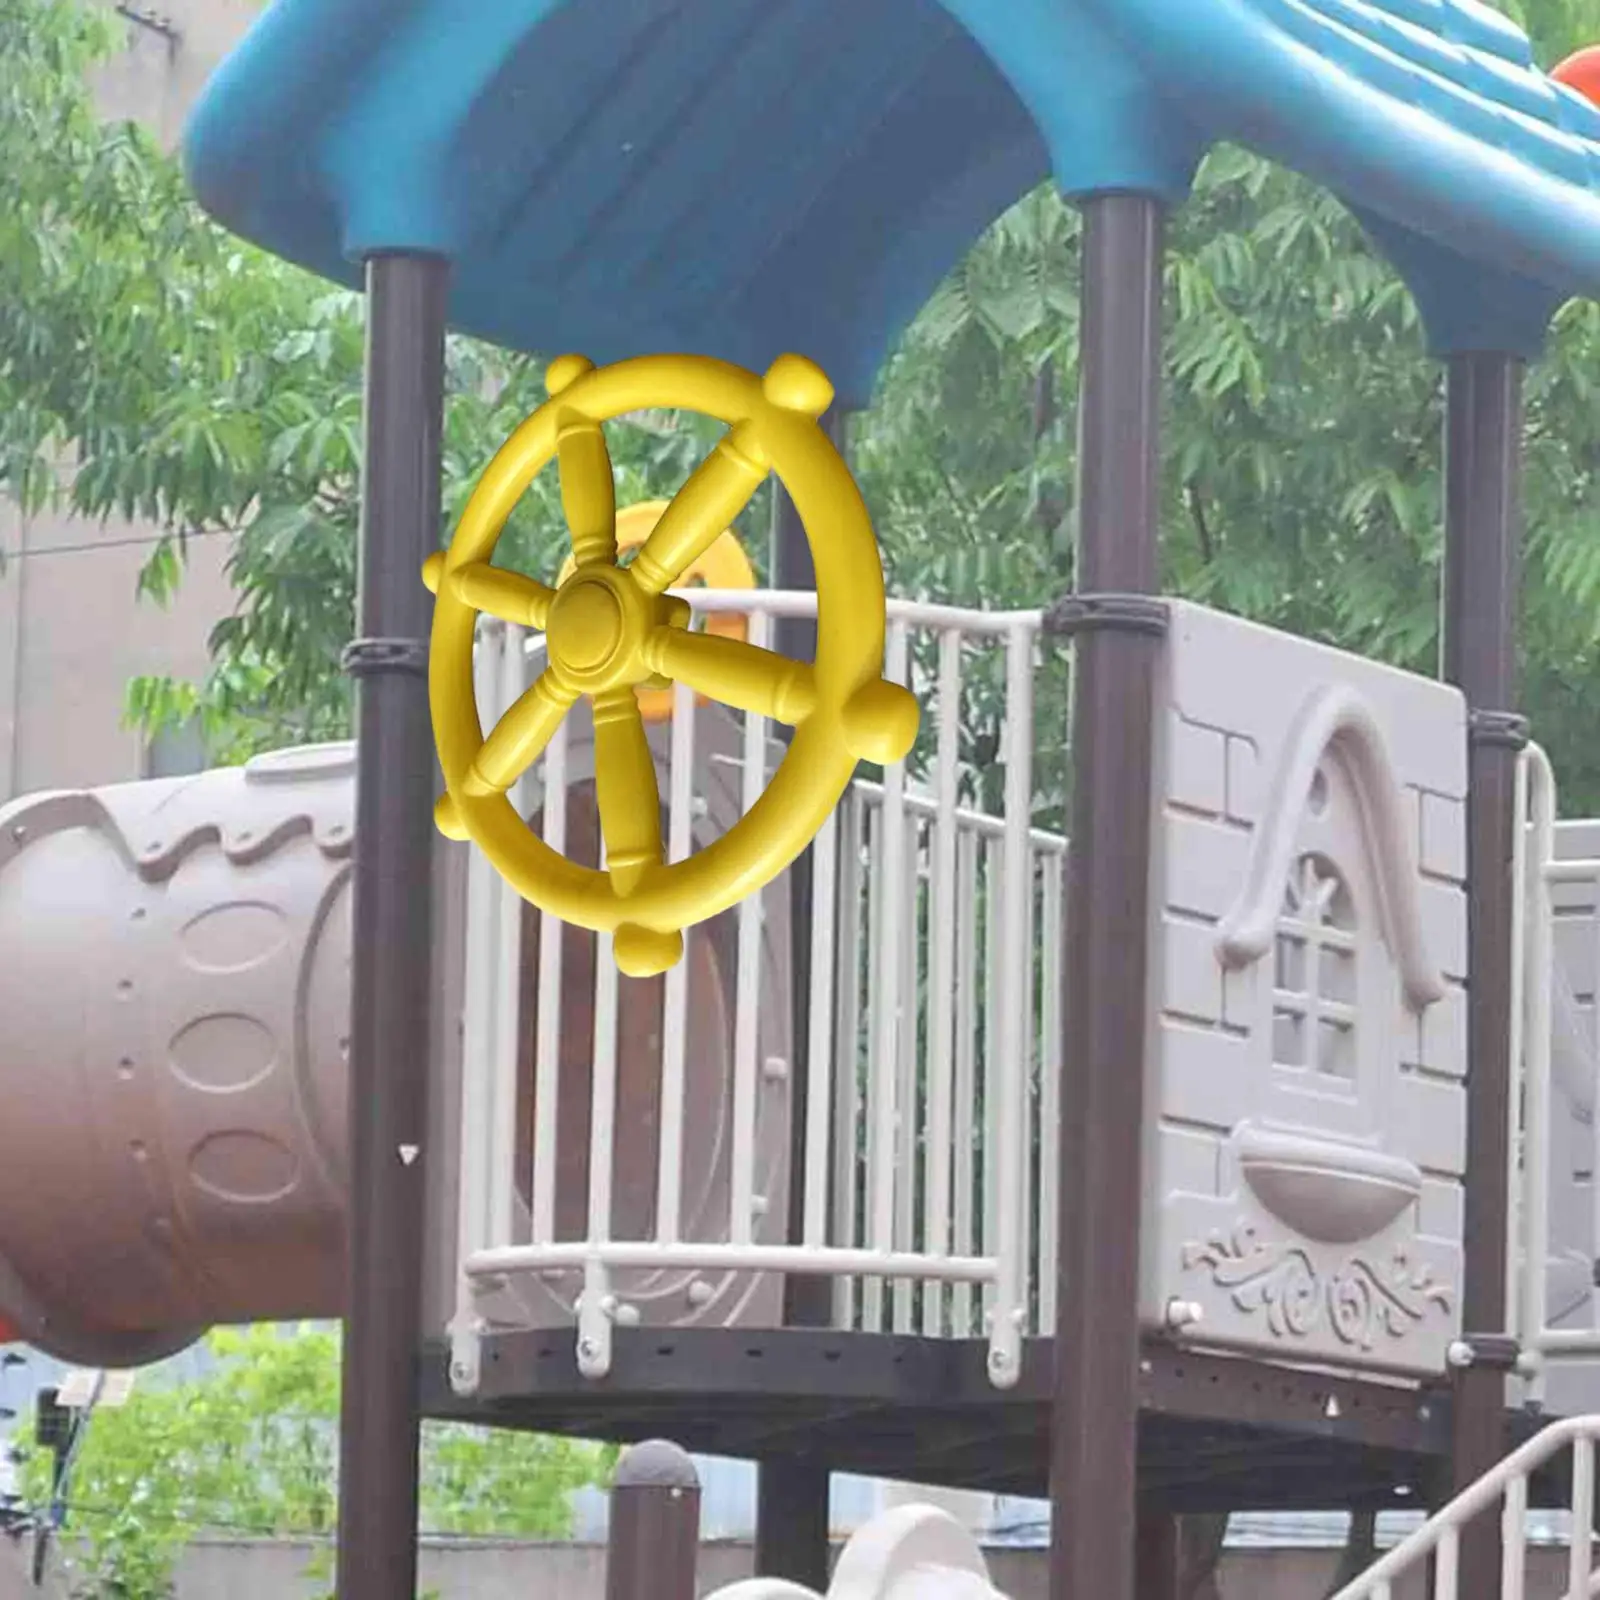 Pirate Ship Wheel Multipurpose with Screws Climb Playground Equipment for Tree House Play House Outdoor Amusement Garden